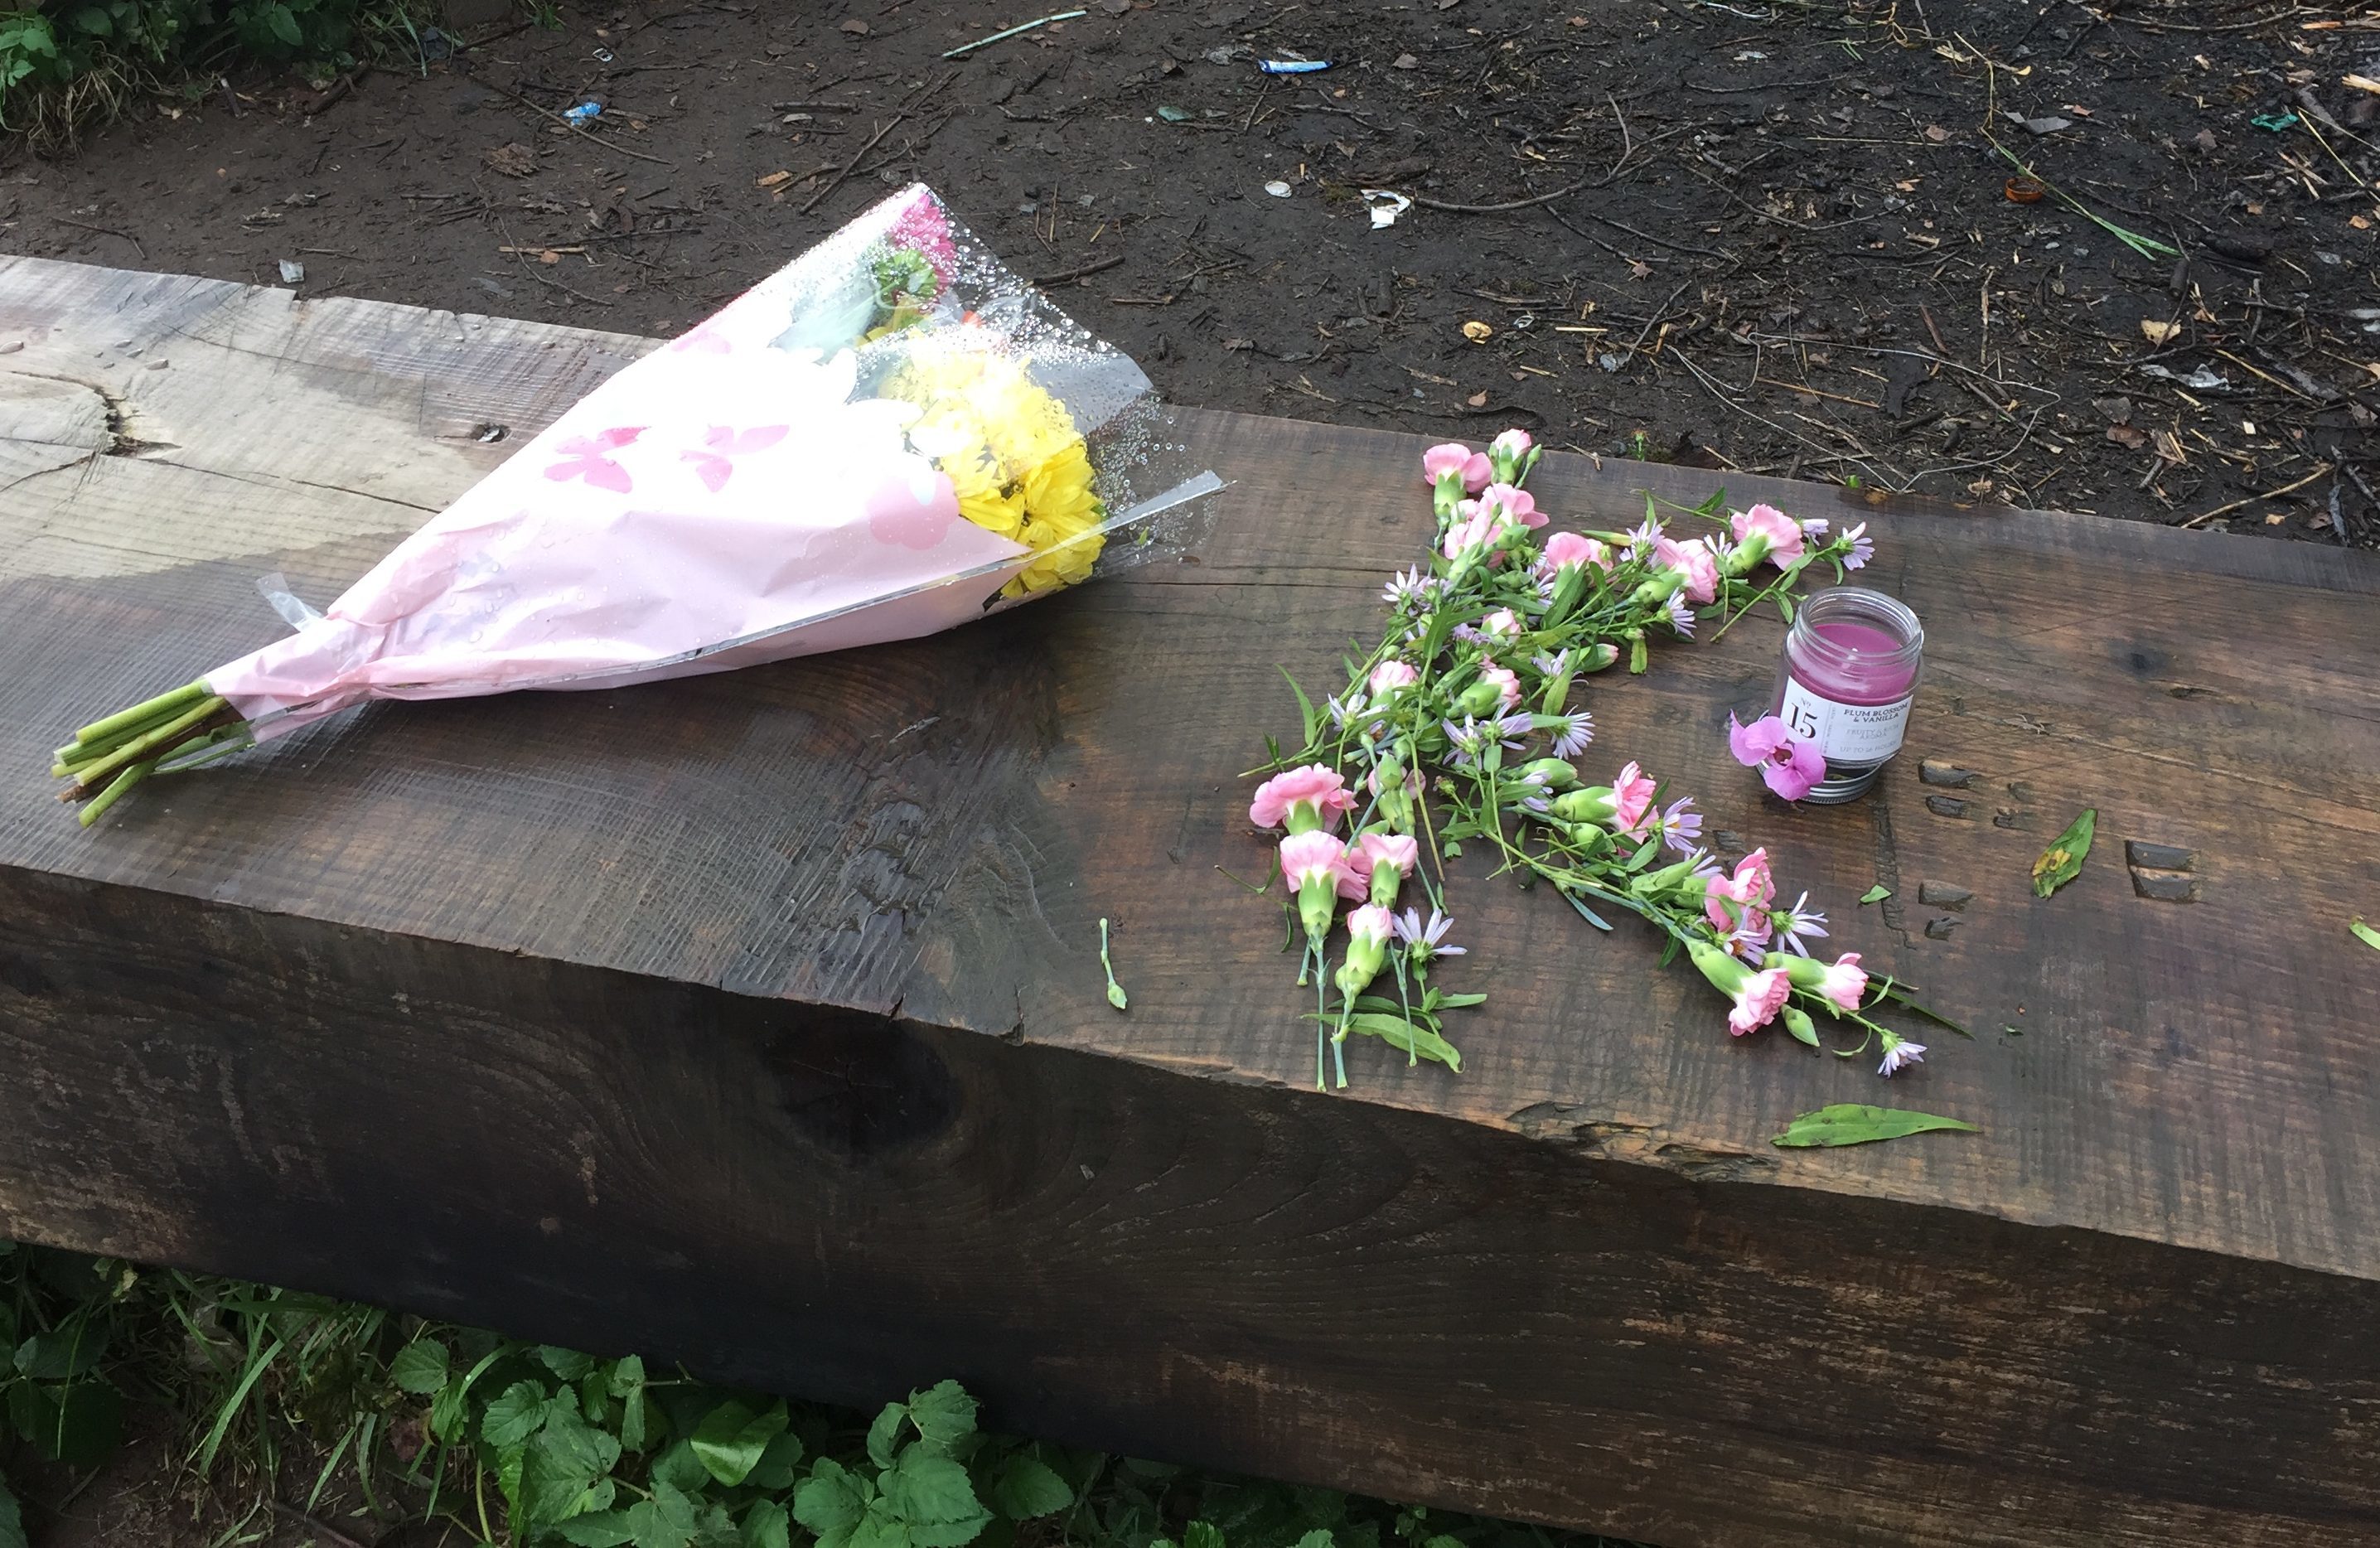 Tributes have been laid near to where Kathleen Harkin was found on Monday, October 10